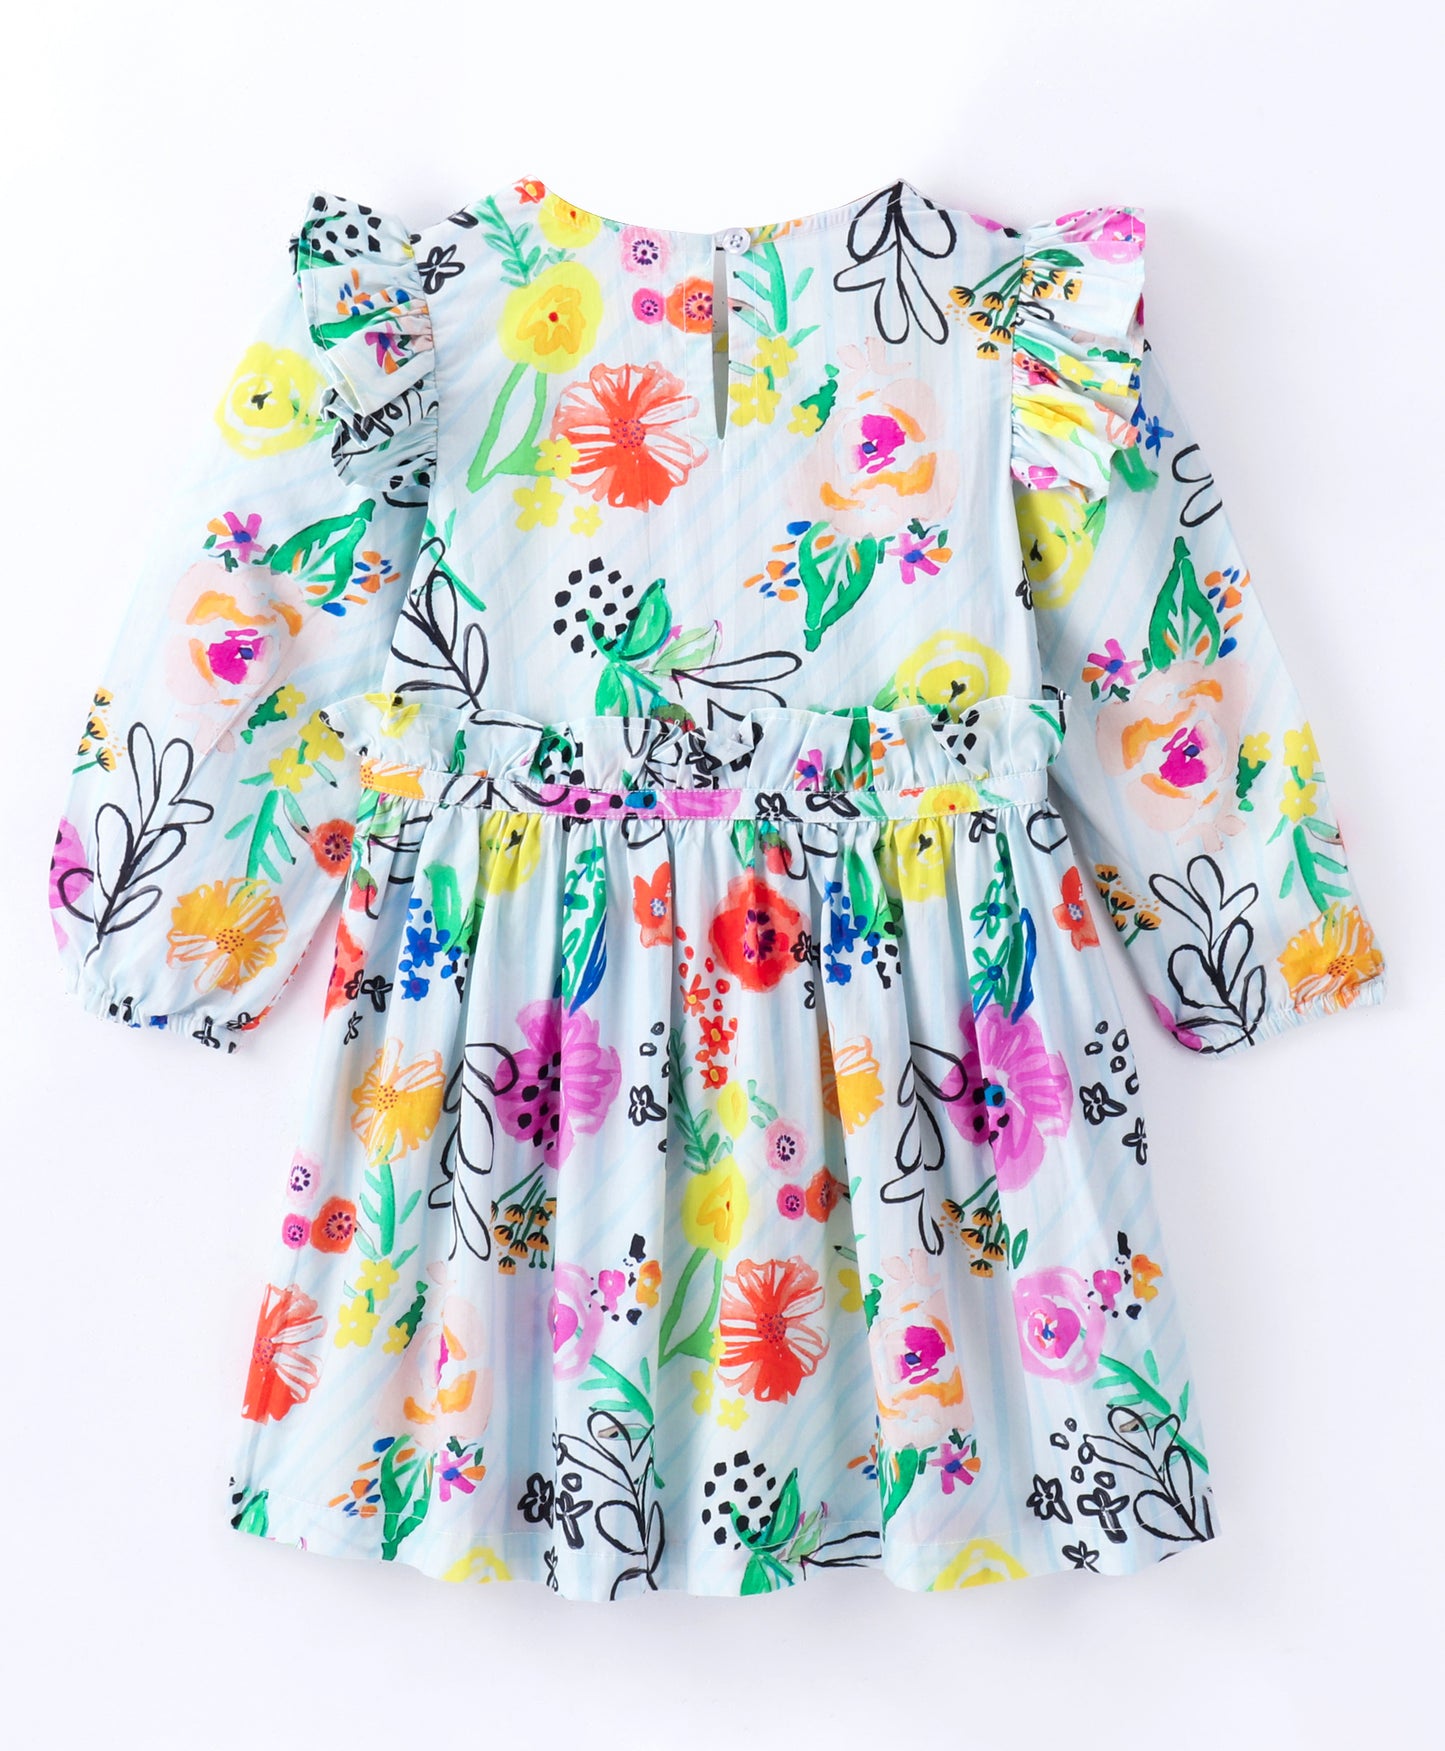 Full Sleeves Watercolor Effect Flowers Printed & Candy Striped Frill Detailed Fit & Flare Dress - White & Multi Color